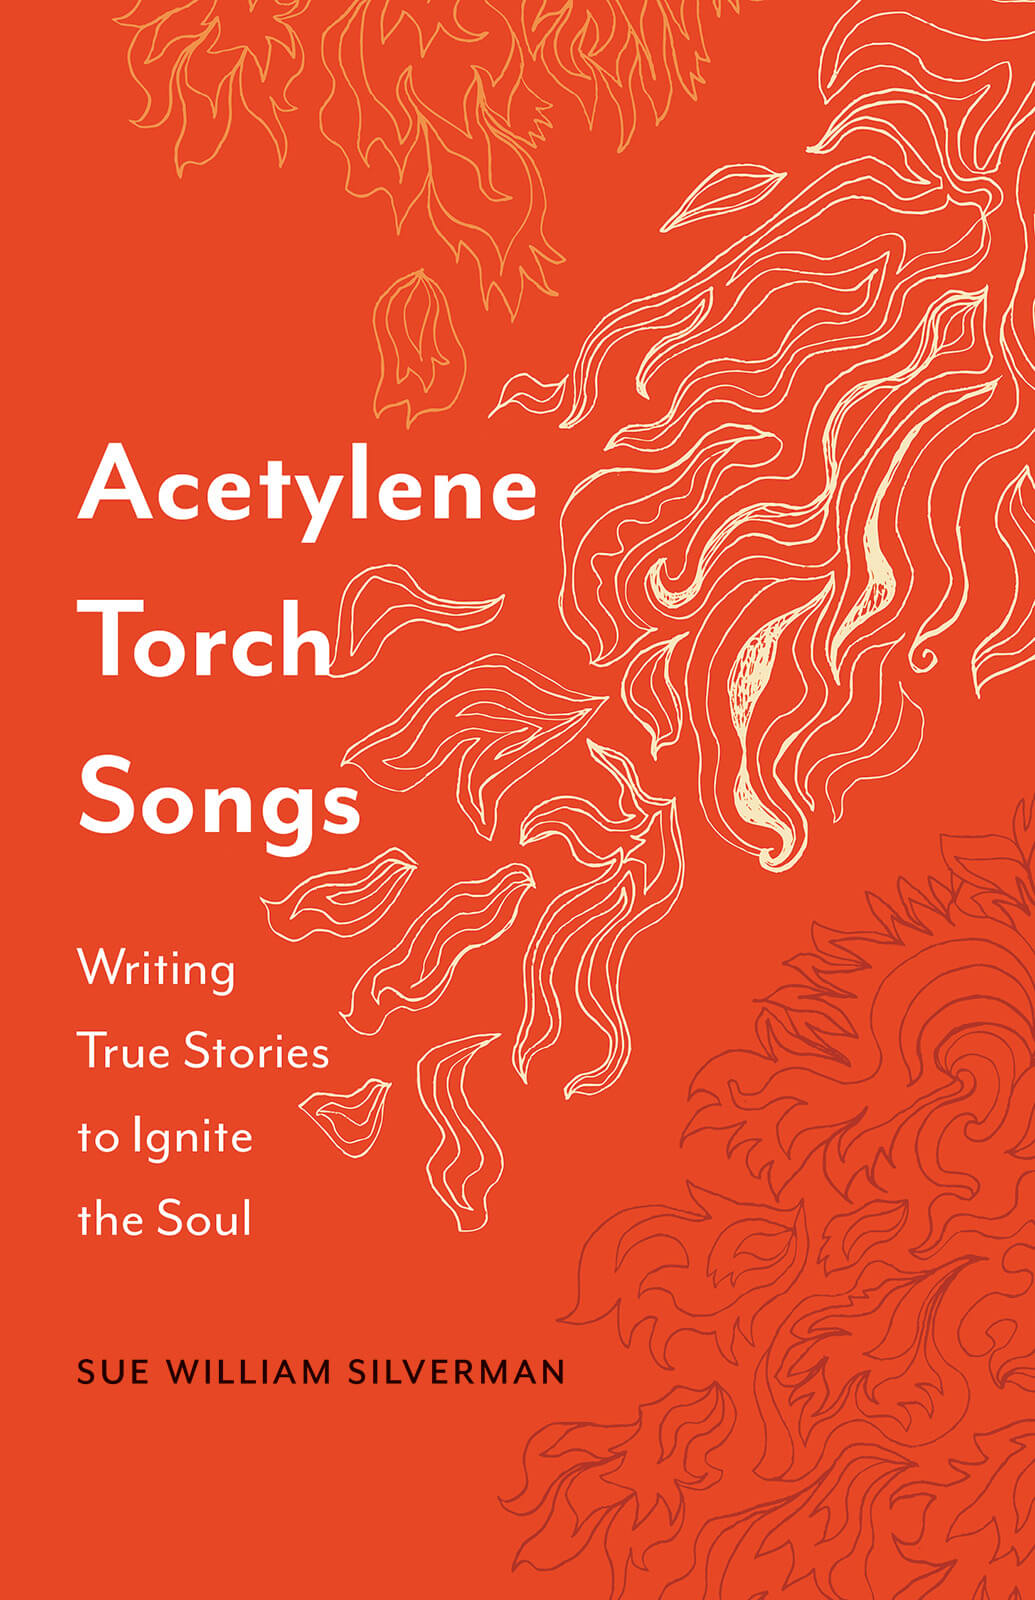 Book cover: Acetylene Torch Songs Writing True Stories to Ignite the Soul - By Sue William Silverman